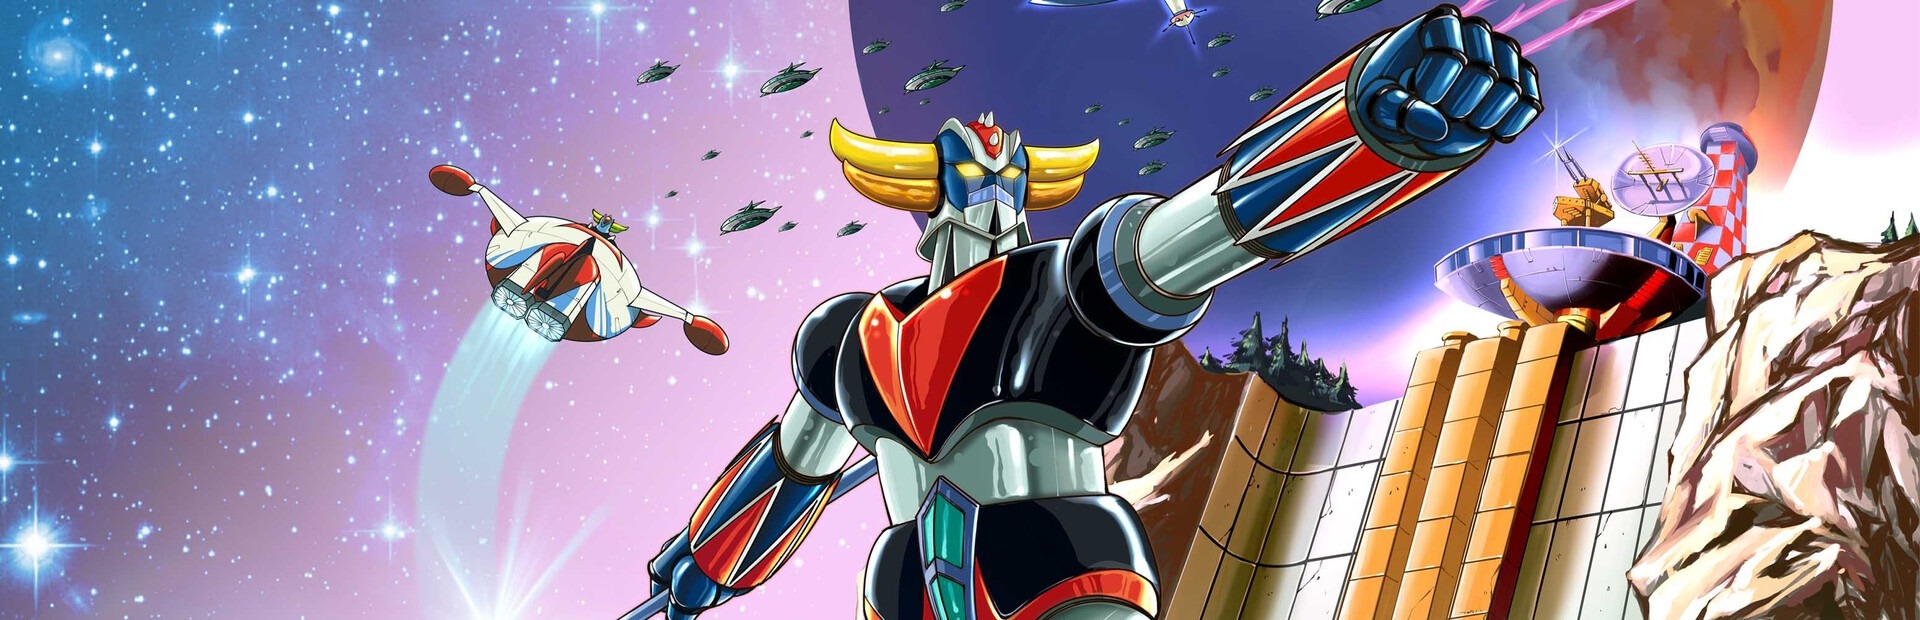 Ufo Robot Grendizer - The Feast of the Wolves